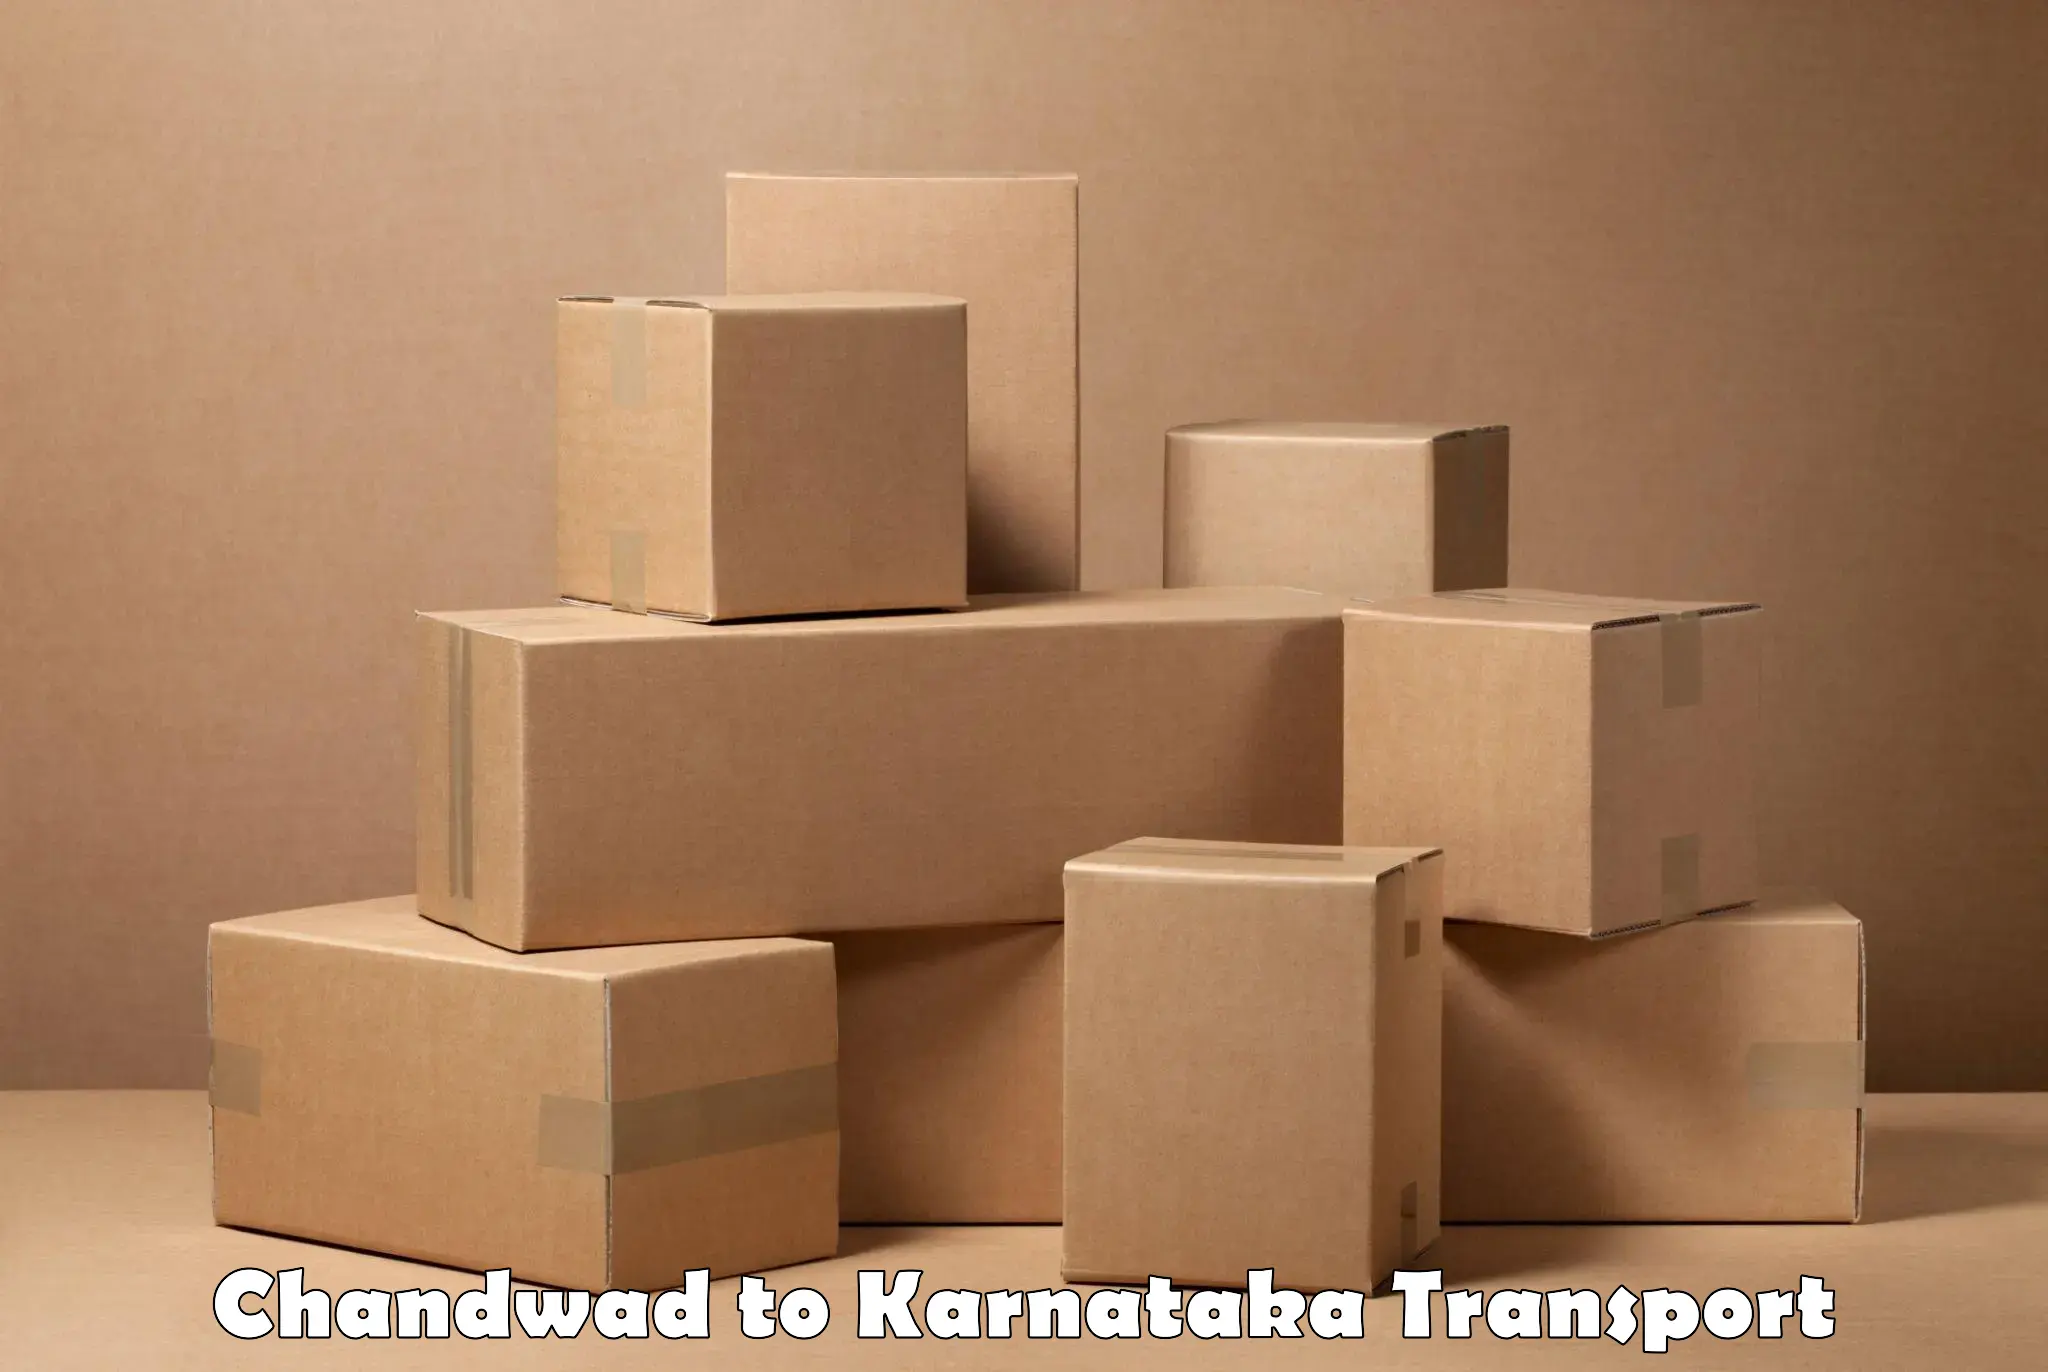 Transportation solution services Chandwad to Manipal